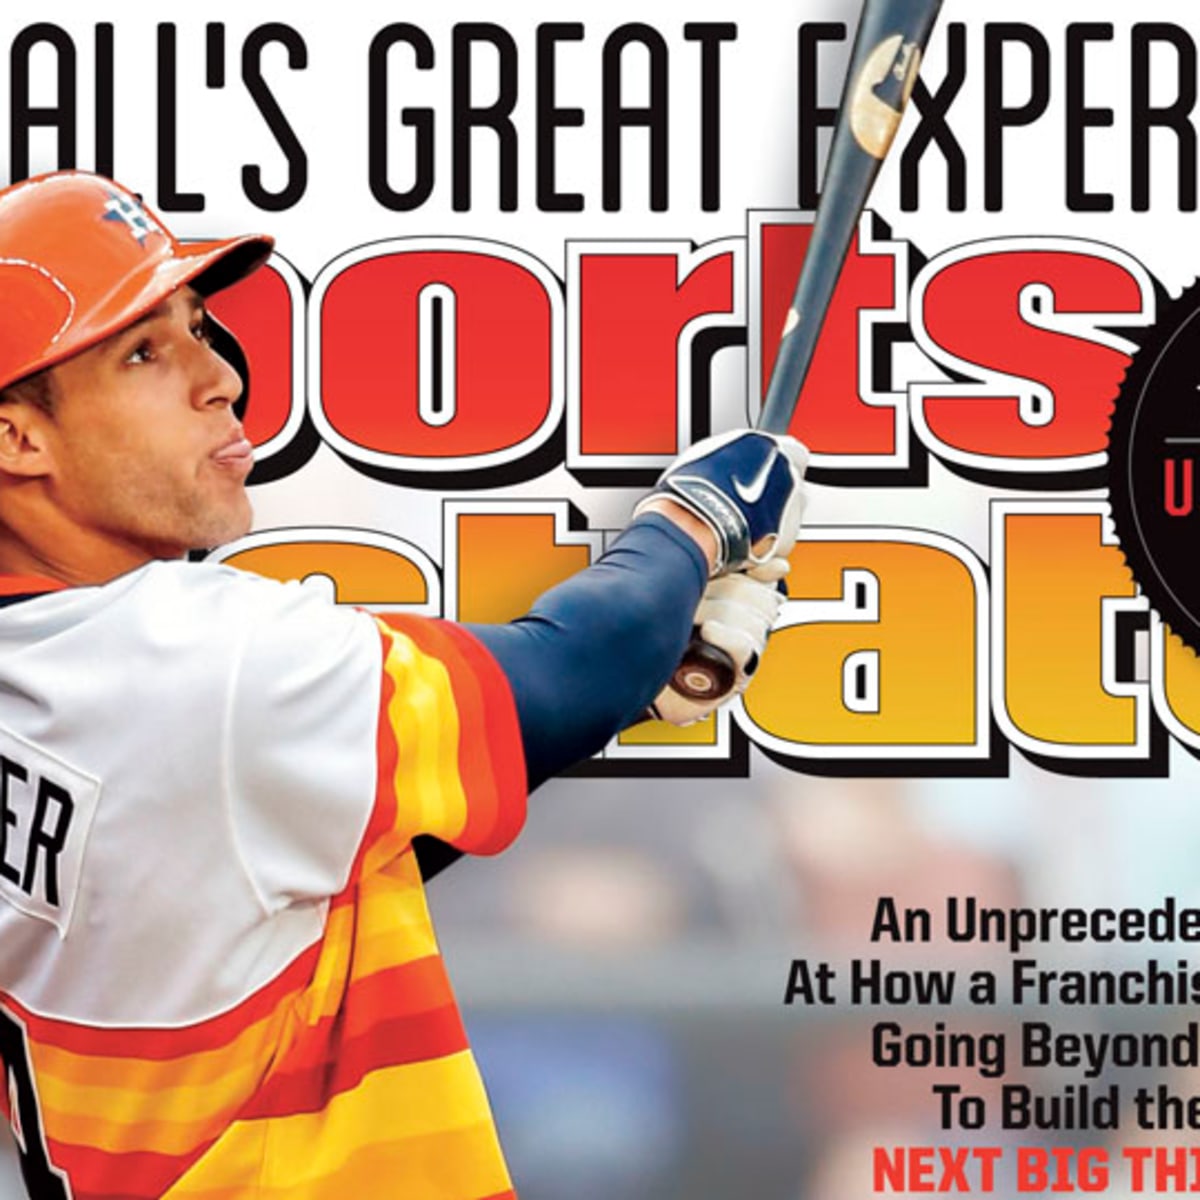 Smith: George Springer's devotion to Astros should be rewarded